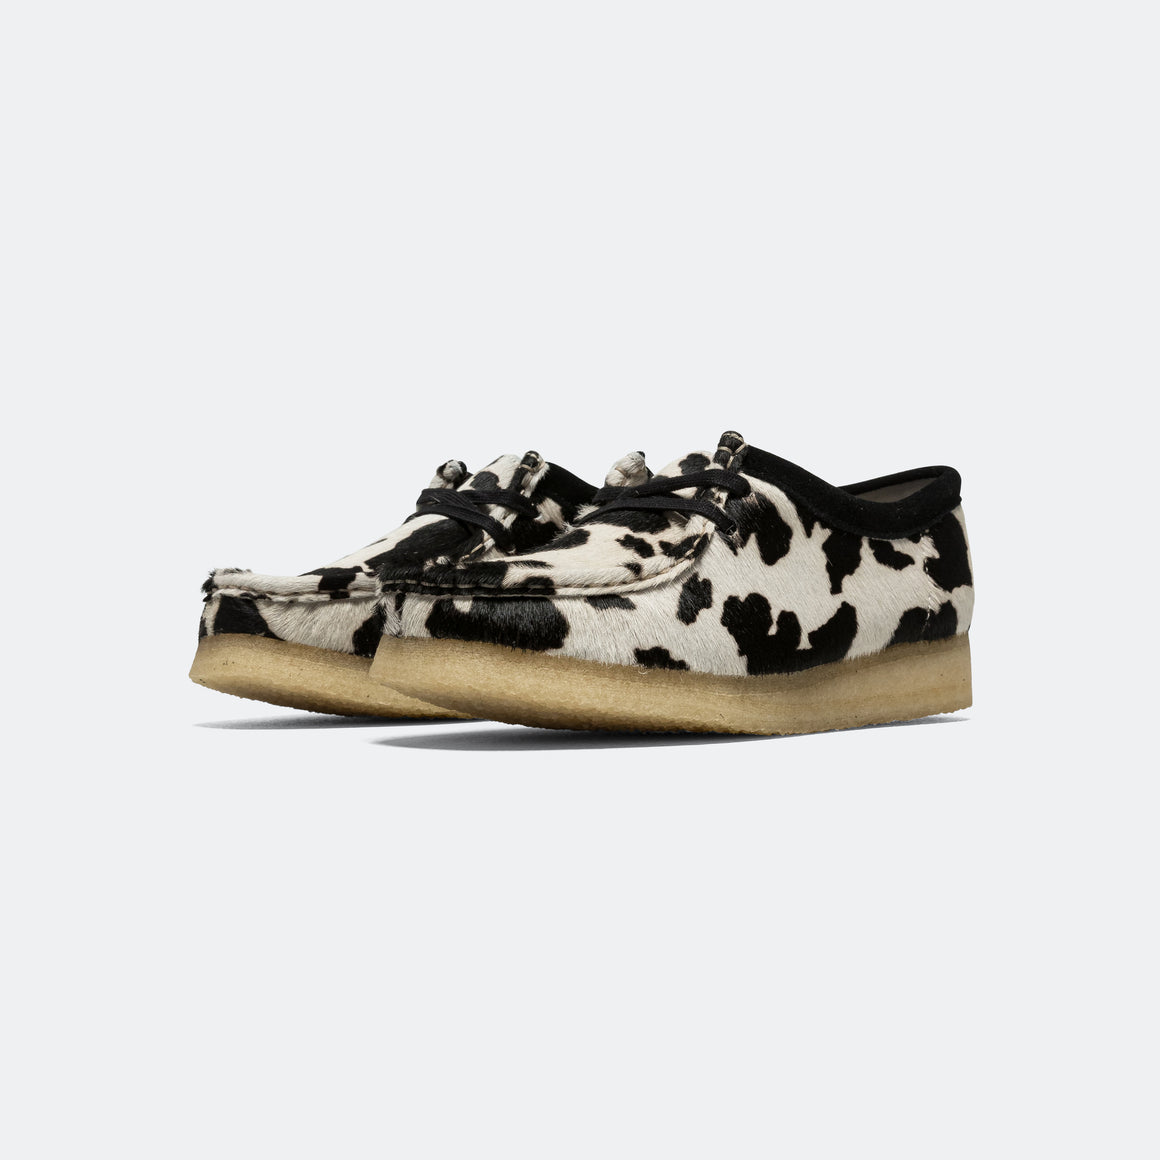 Clarks - Womens Wallabee - Black Cow Print - UP THERE